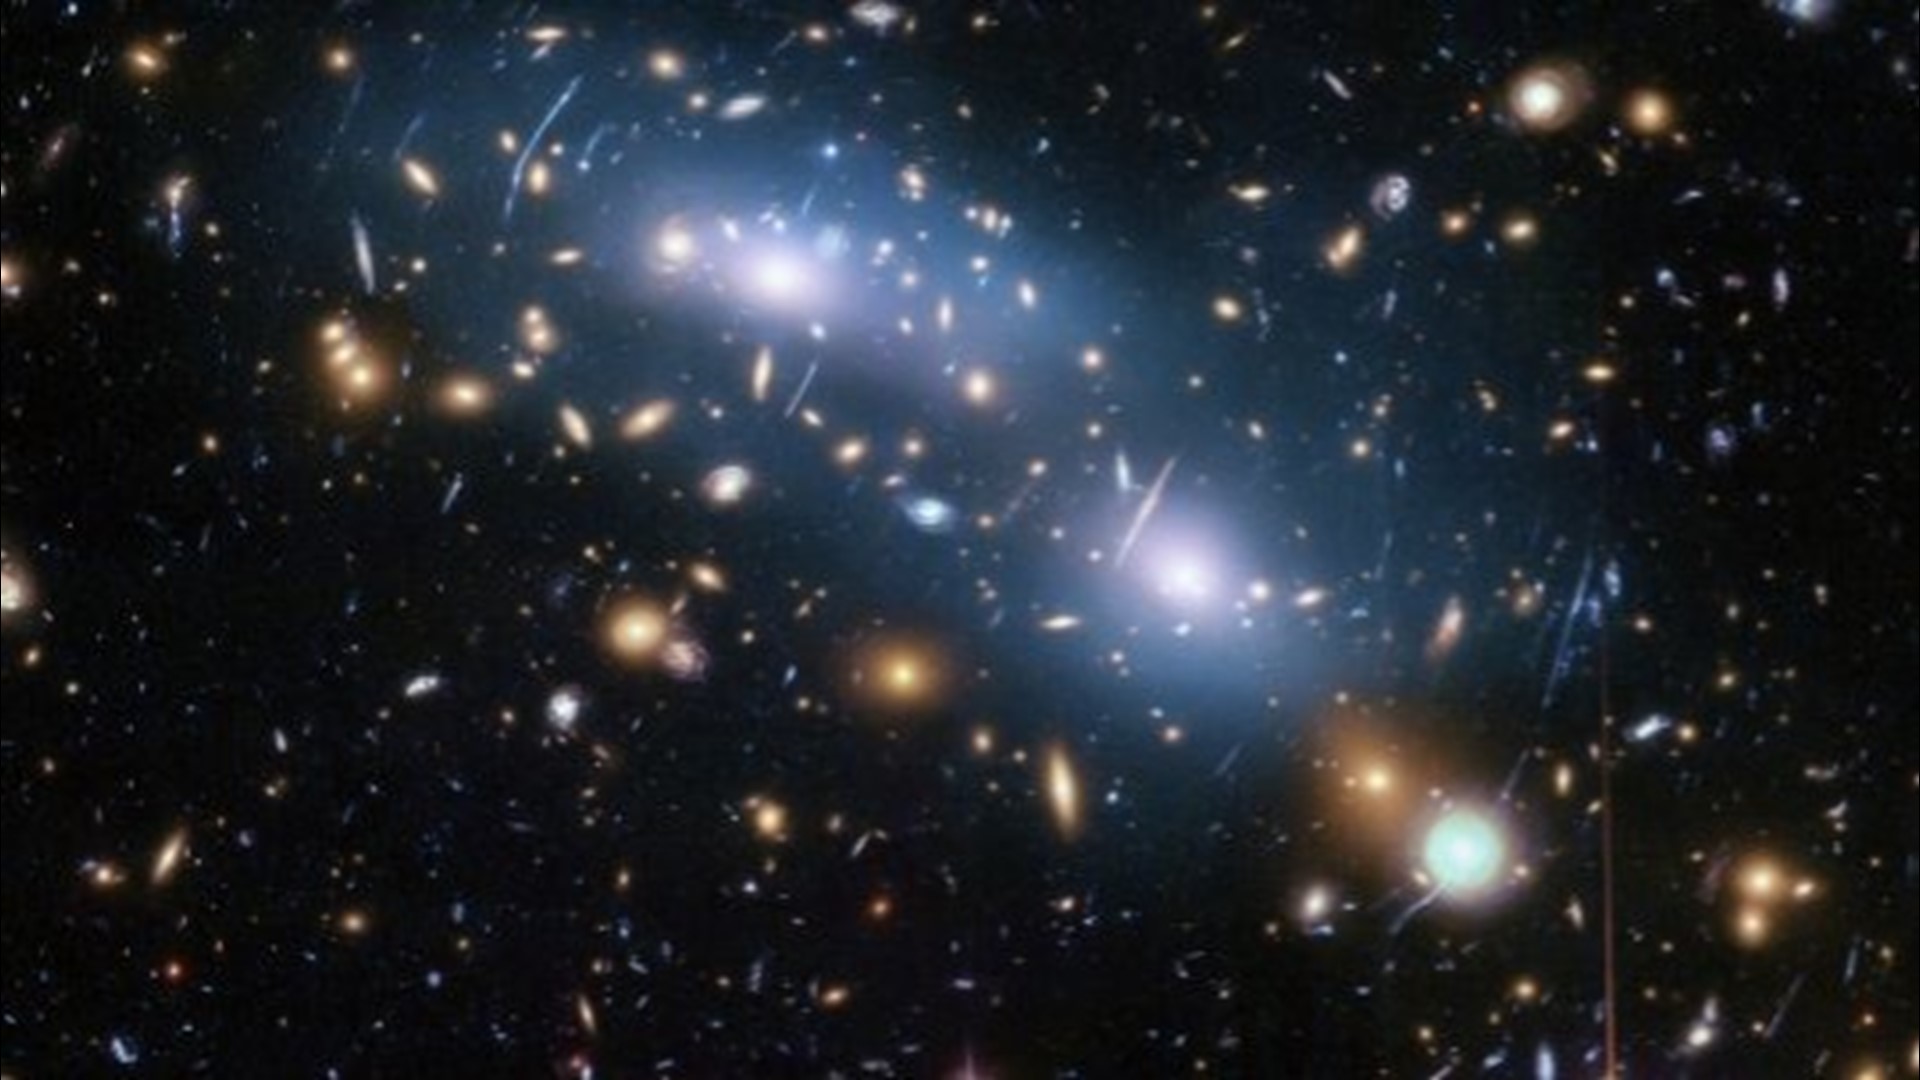 Researchers stumbled upon a 'surprising find' when using ESA/NASA's Hubble Space Telescope to look back 500 million to 1 billion years after the big bang.